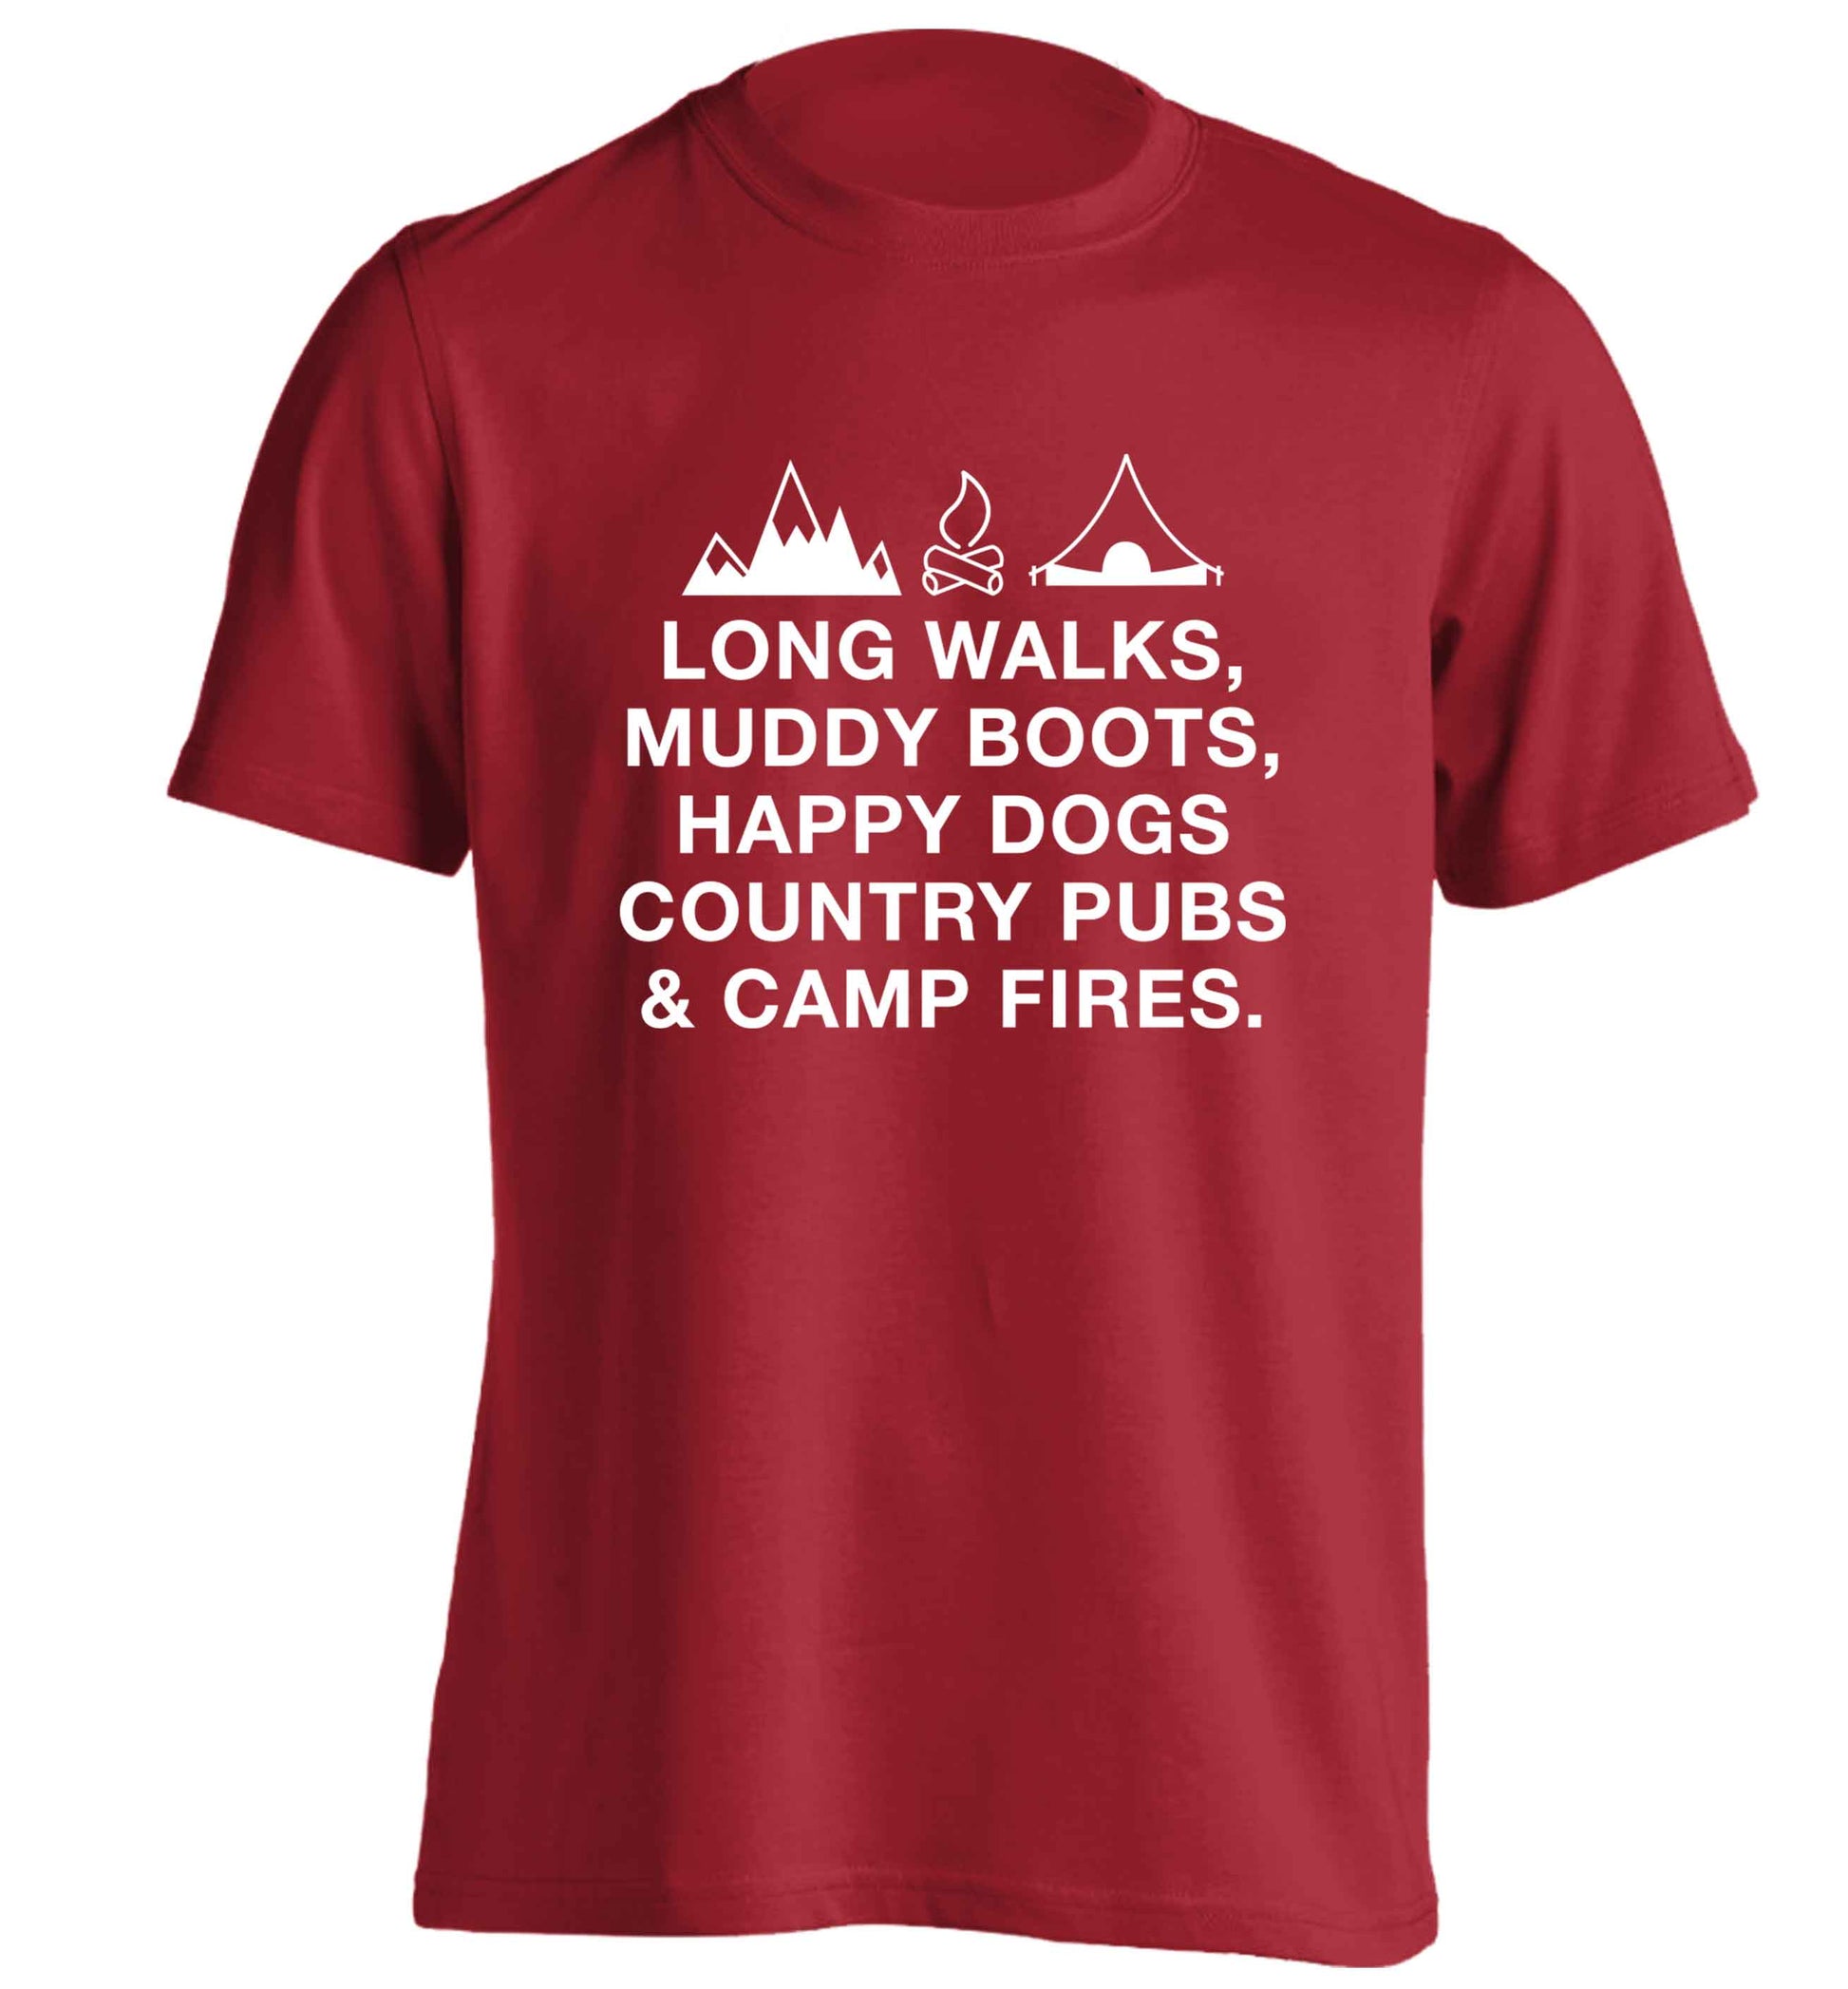 Long walks muddy boots happy dogs country pubs and camp fires adults unisex red Tshirt 2XL